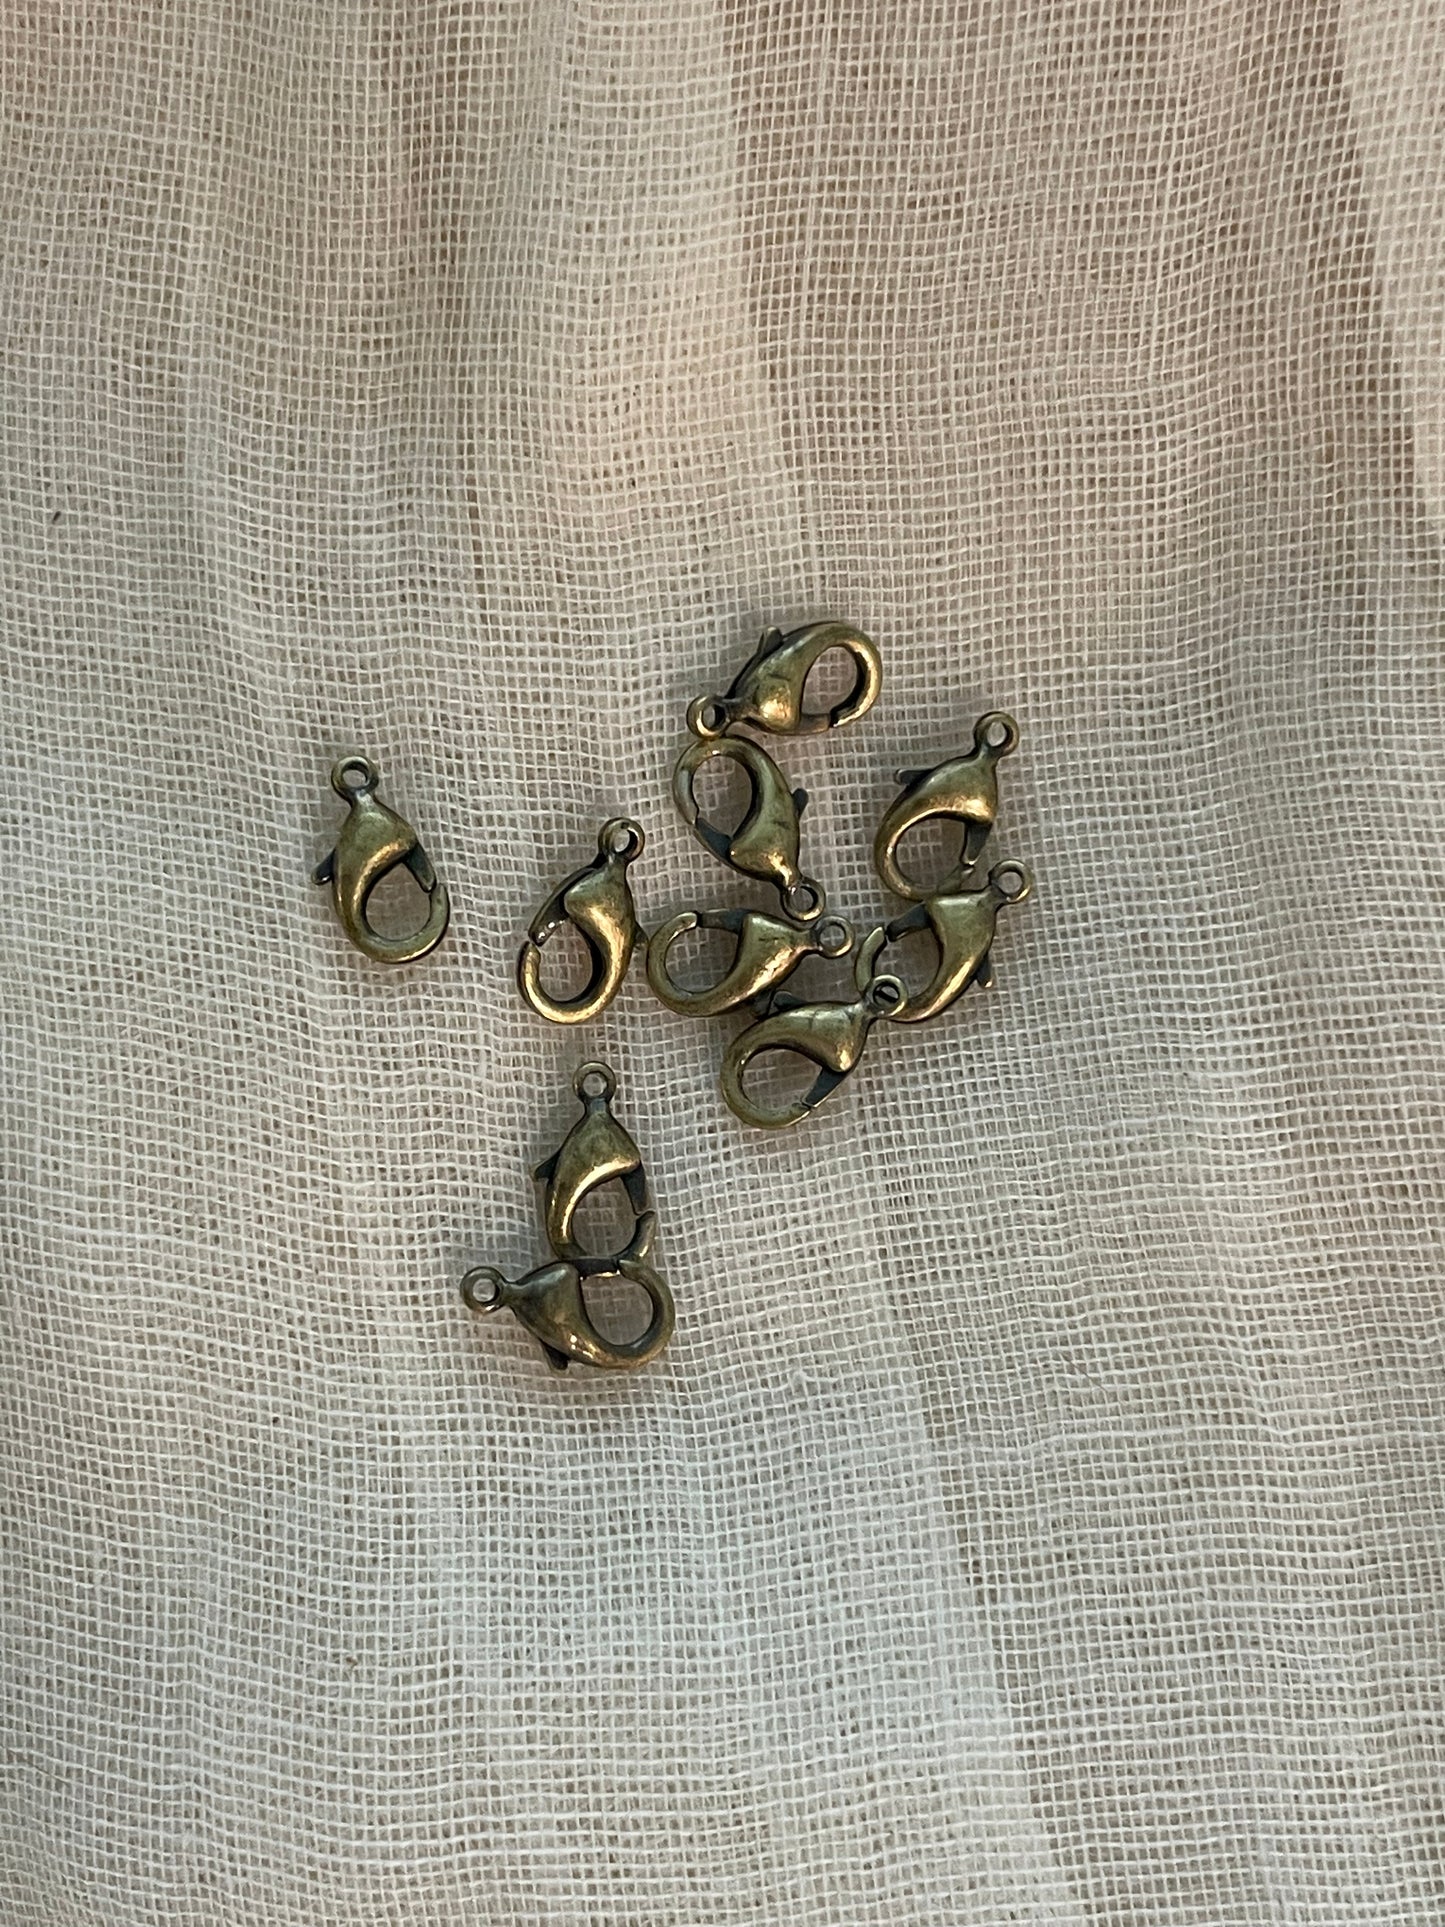 Antique Brass Lobster Claw Clasps 12mm x 7mm 10 Pieces